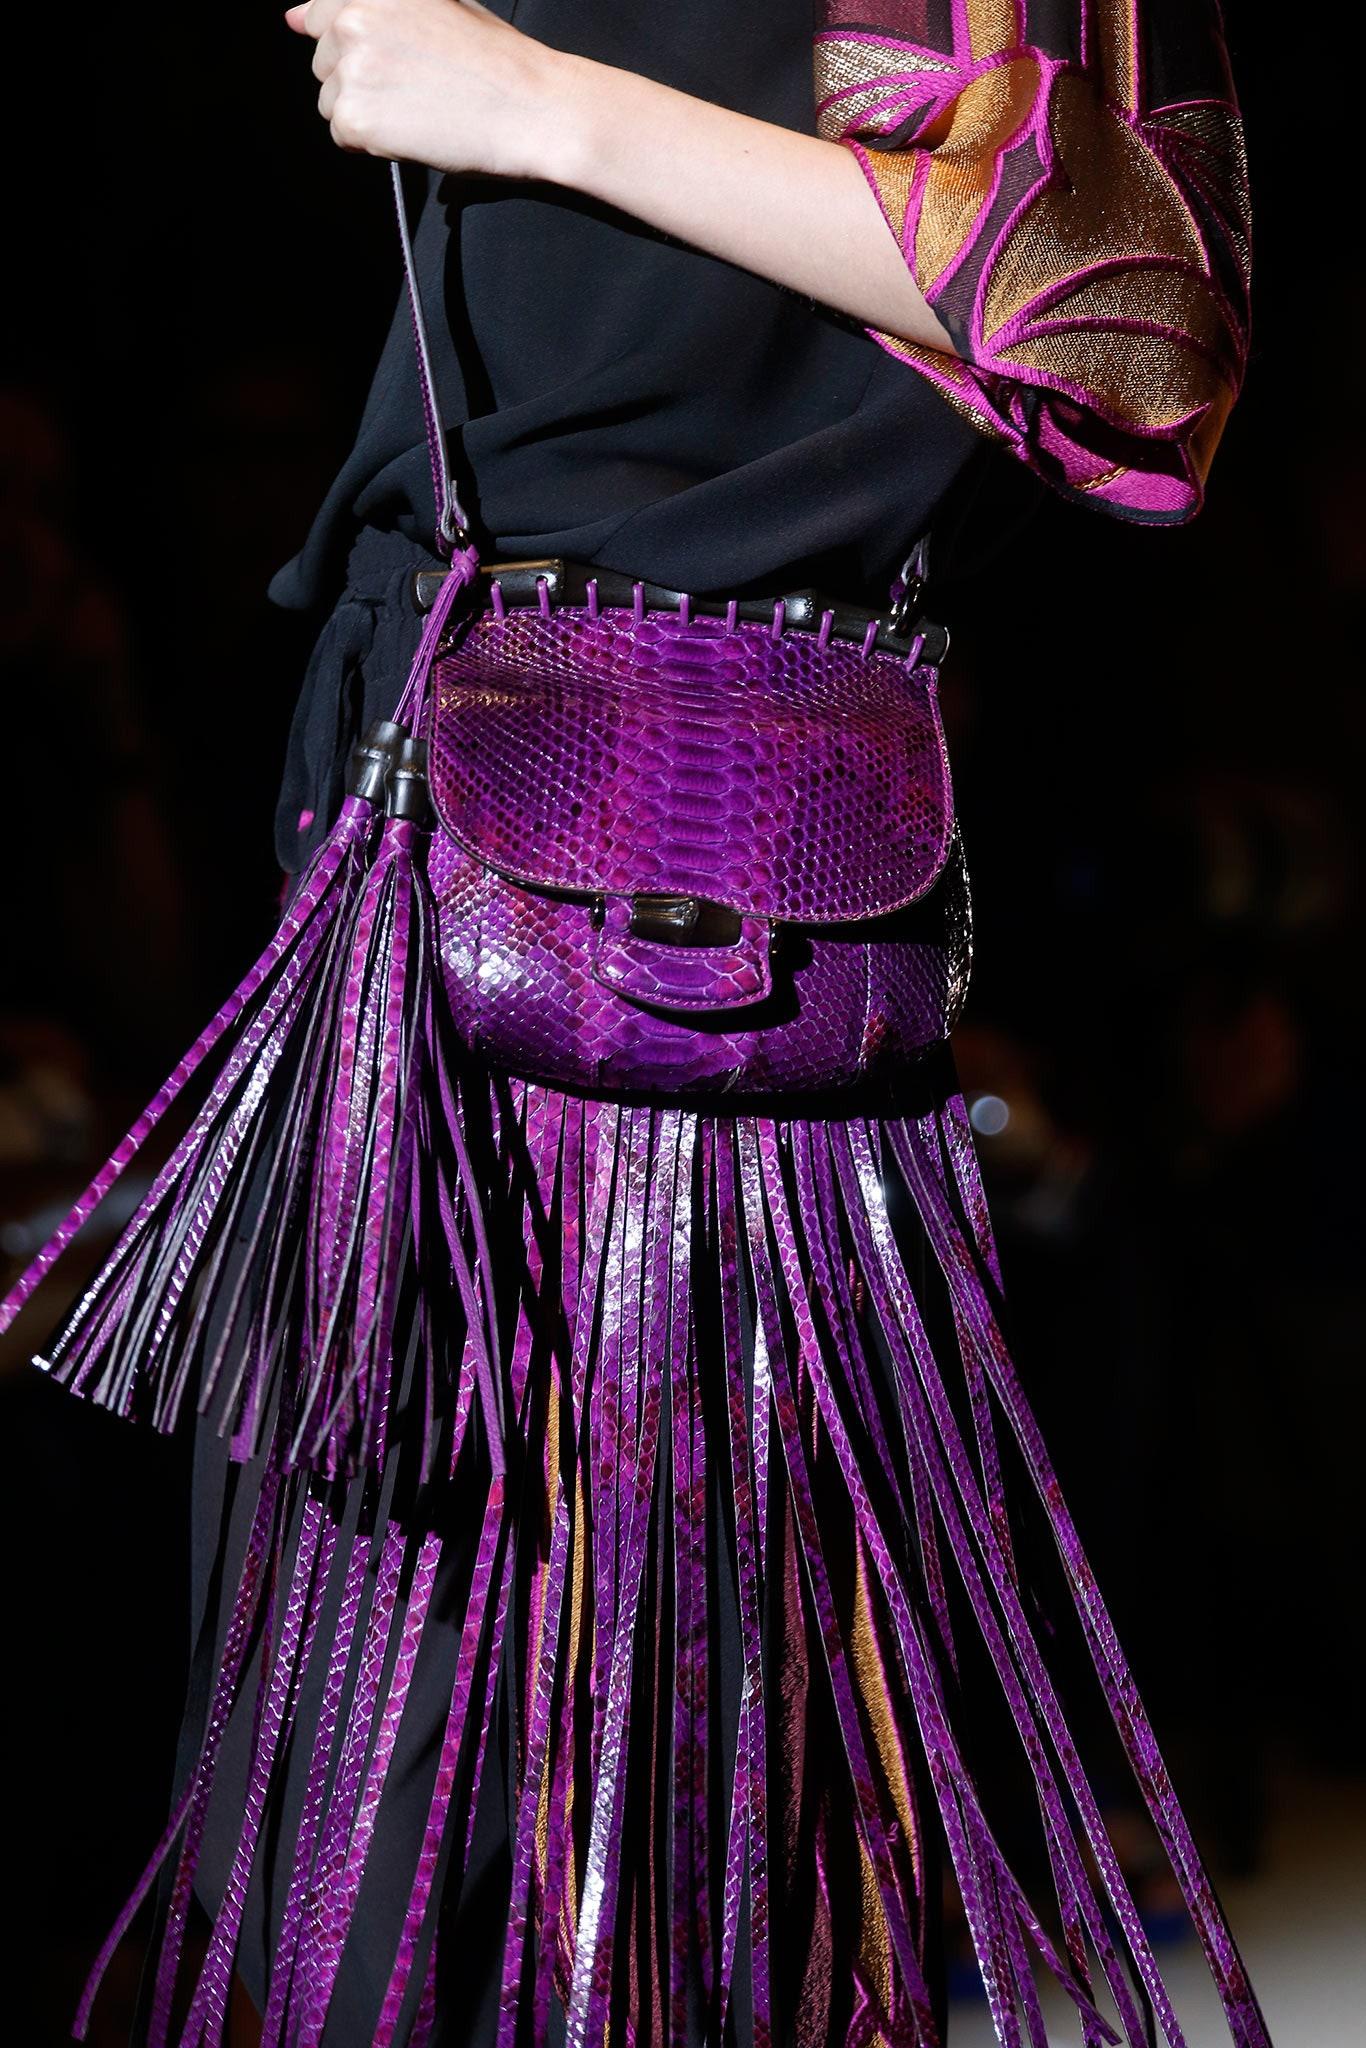 New Gucci Nouveau Python Fringe Bamboo Runway Bag in Plum $3100 2